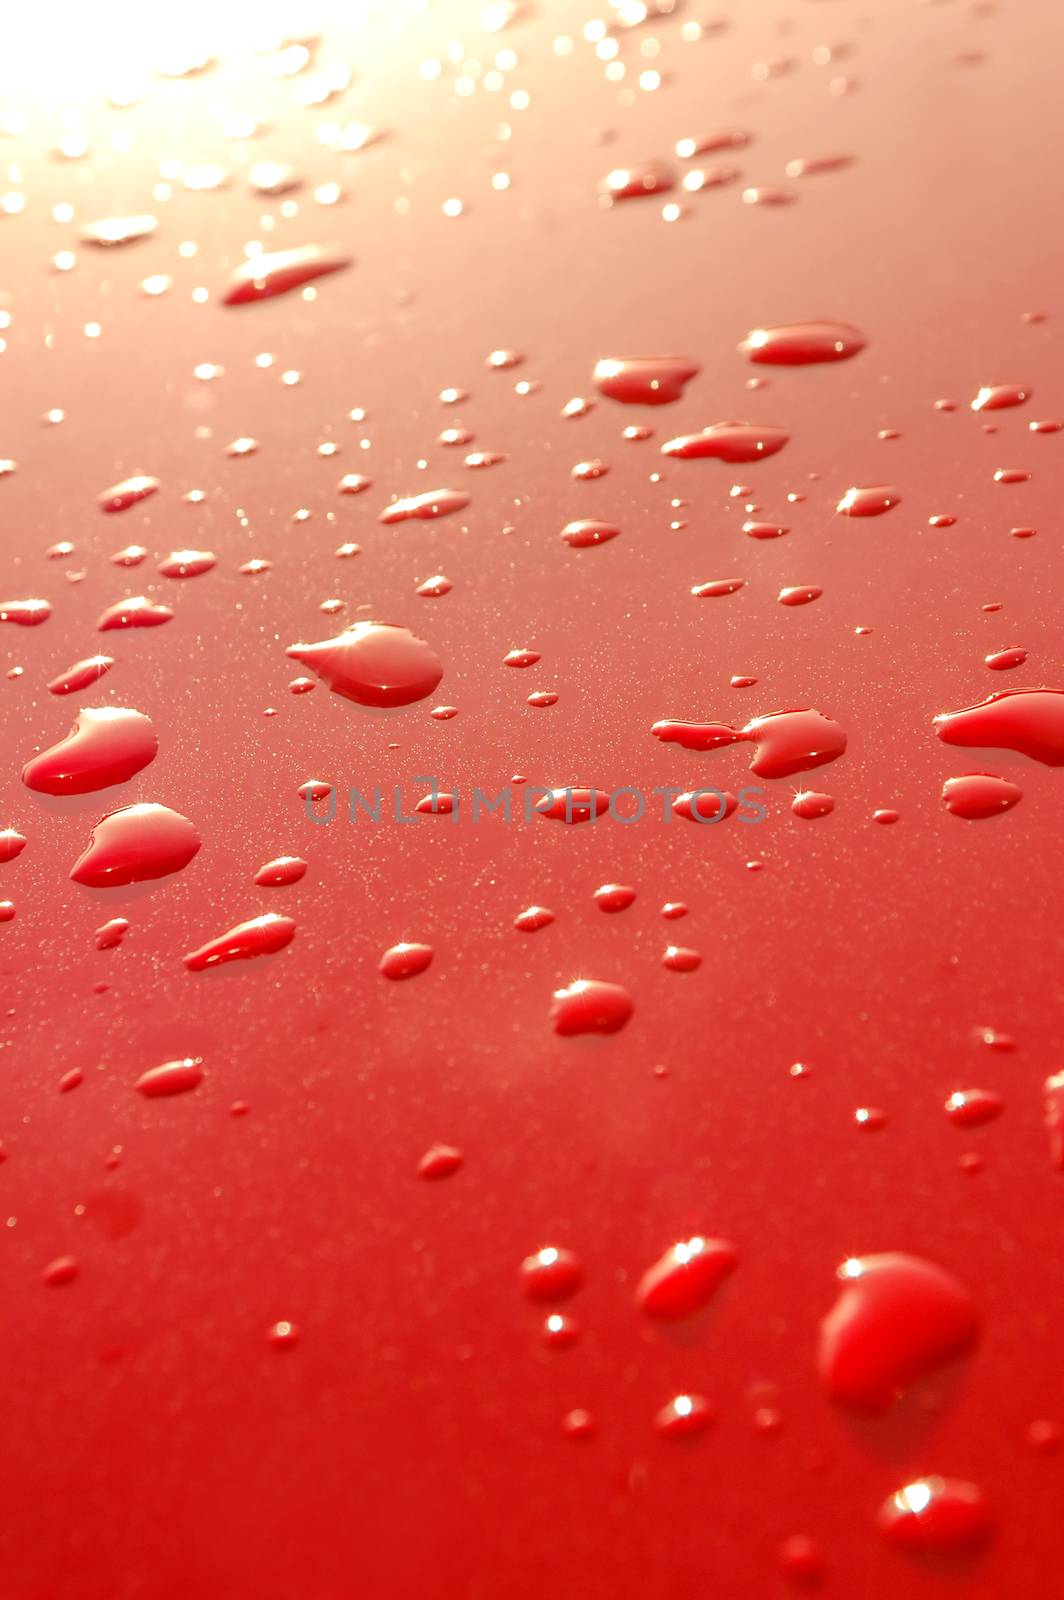 raindrops on red by nelsonart